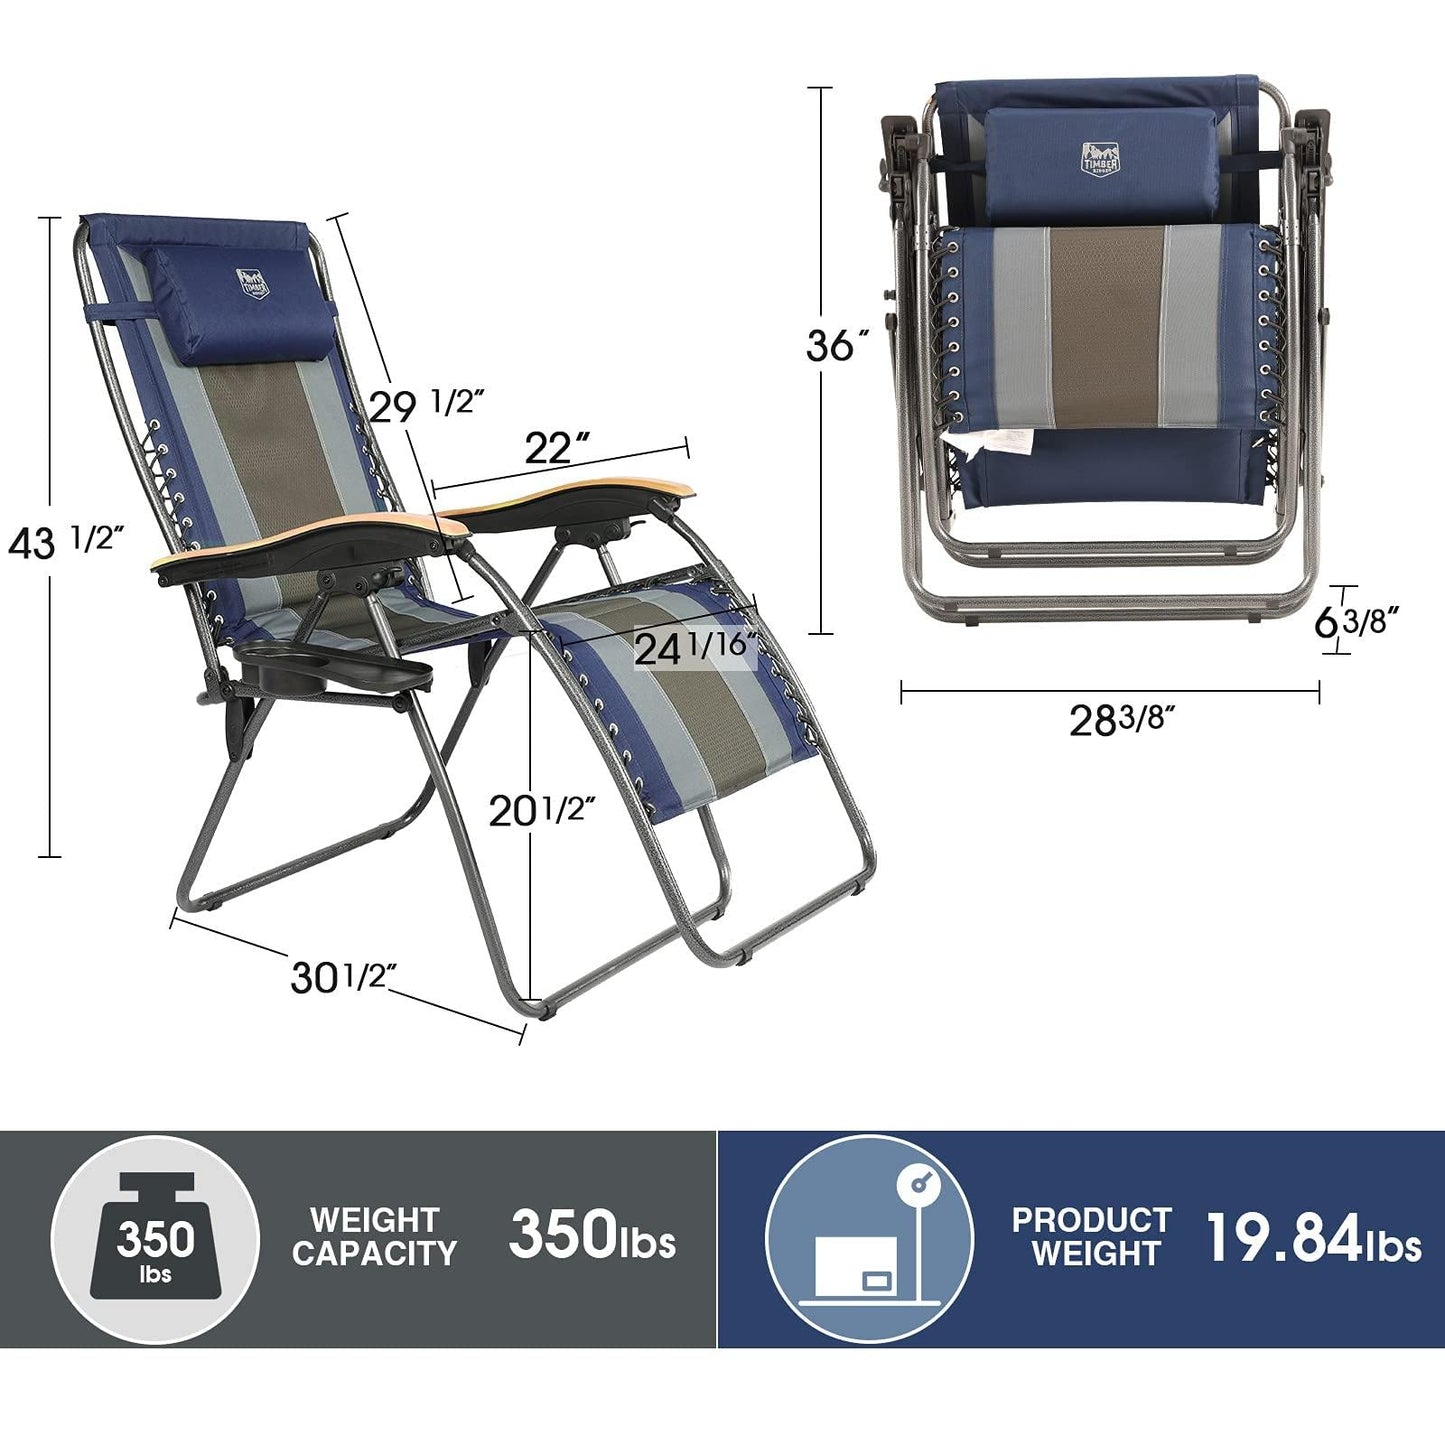 TIMBER RIDGE Oversized Zero Gravity Padded with Adjustable Headrest and Cup Holder Outdoor Reclining Chairs XXL for Lawn, Camping, Patio, Support up to 350 LBS, Blue